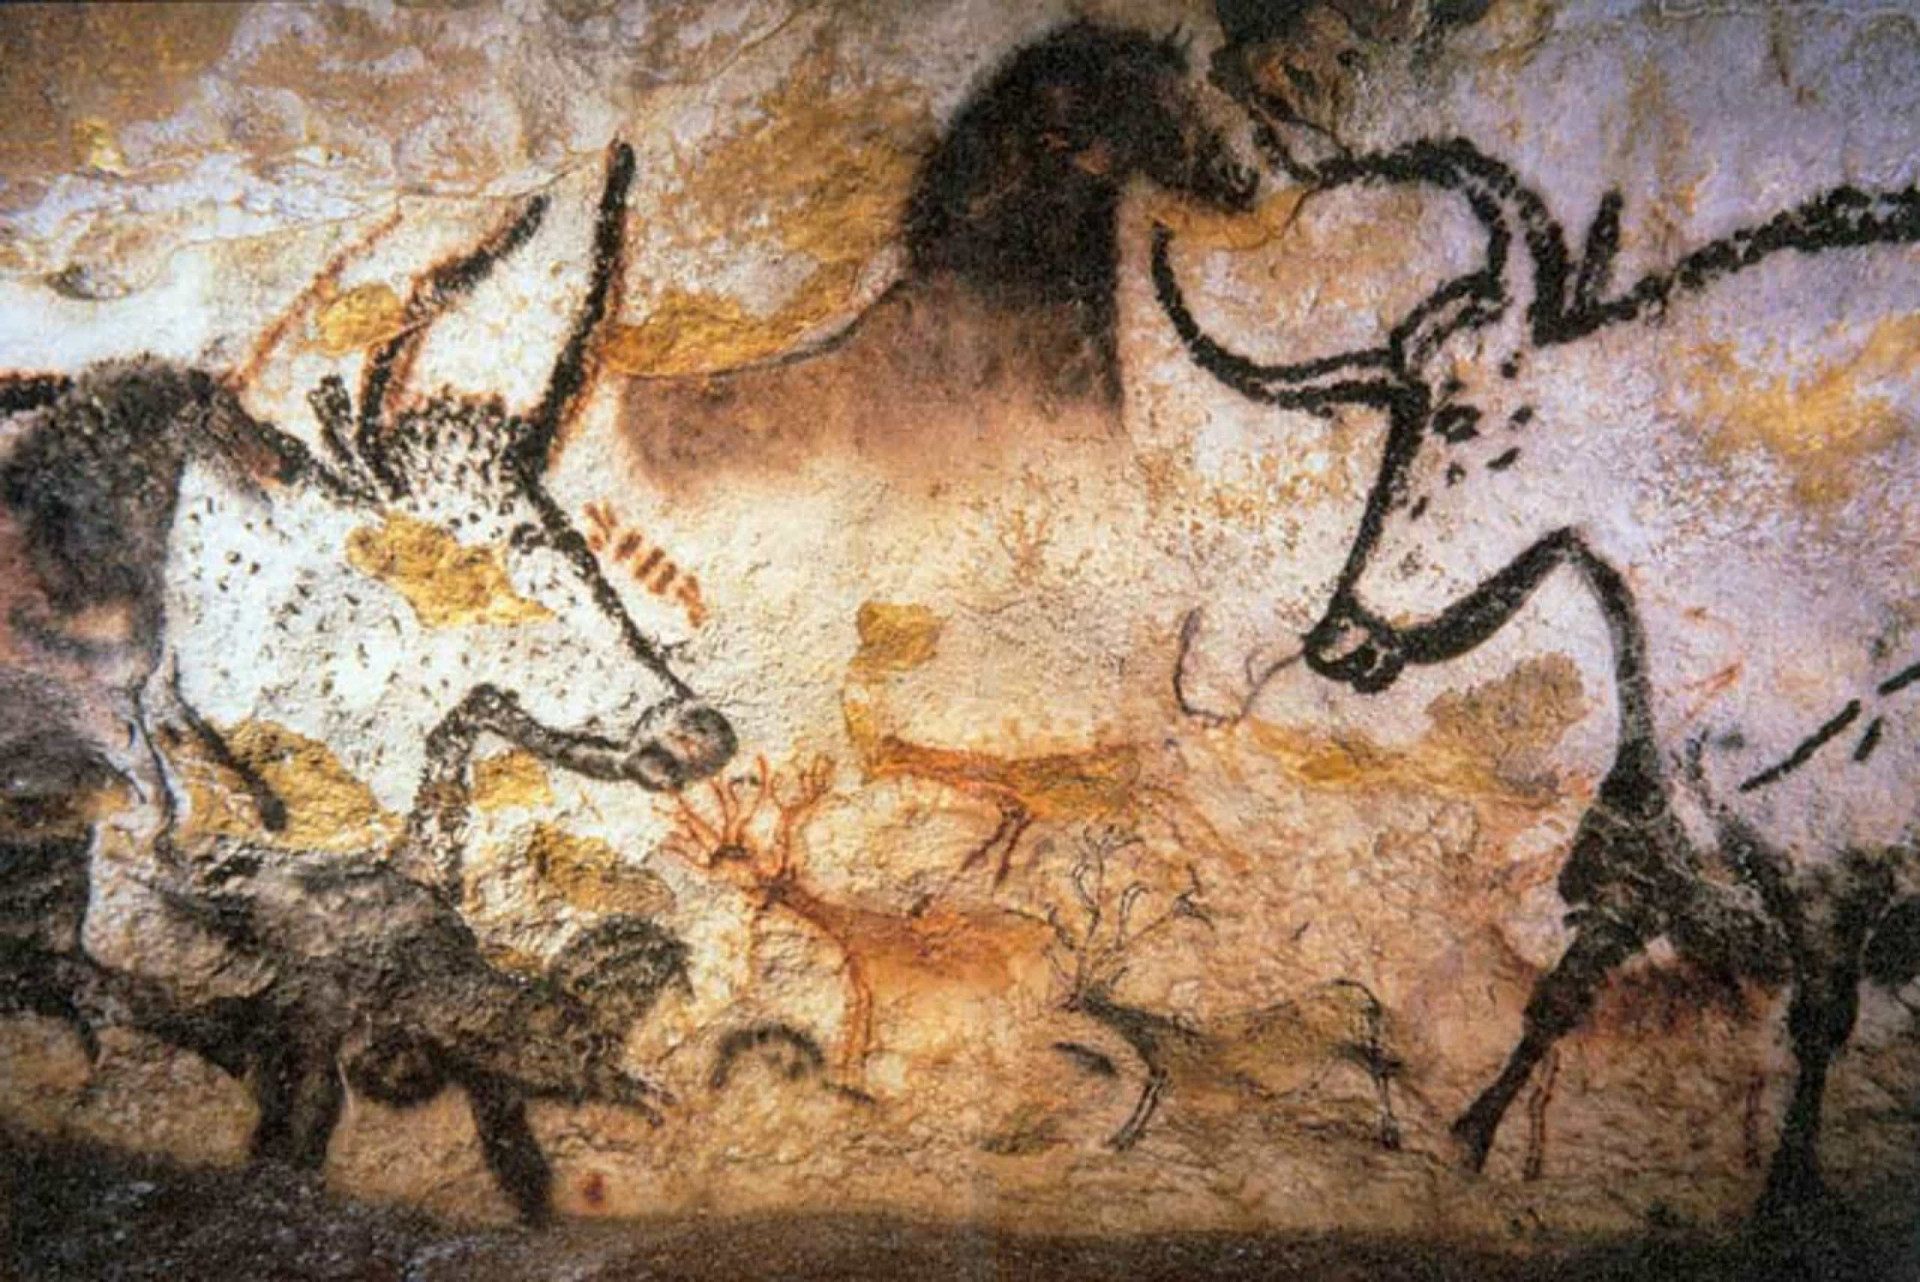 <p>The prehistoric Lascaux cave complex near the village of Montignac was closed to the public back in 1963 after carbon dioxide exhaled by visitors began damaging the cave paintings, estimated to be 17,300 years old. A replica cave was opened in 1983 so that visitors could still experience the paintings without damaging the originals.</p><p>You may also like:<a href="https://www.starsinsider.com/n/233983?utm_source=msn.com&utm_medium=display&utm_campaign=referral_description&utm_content=668561en-my"> Unplugged: Celebrities who have given up social media</a></p>